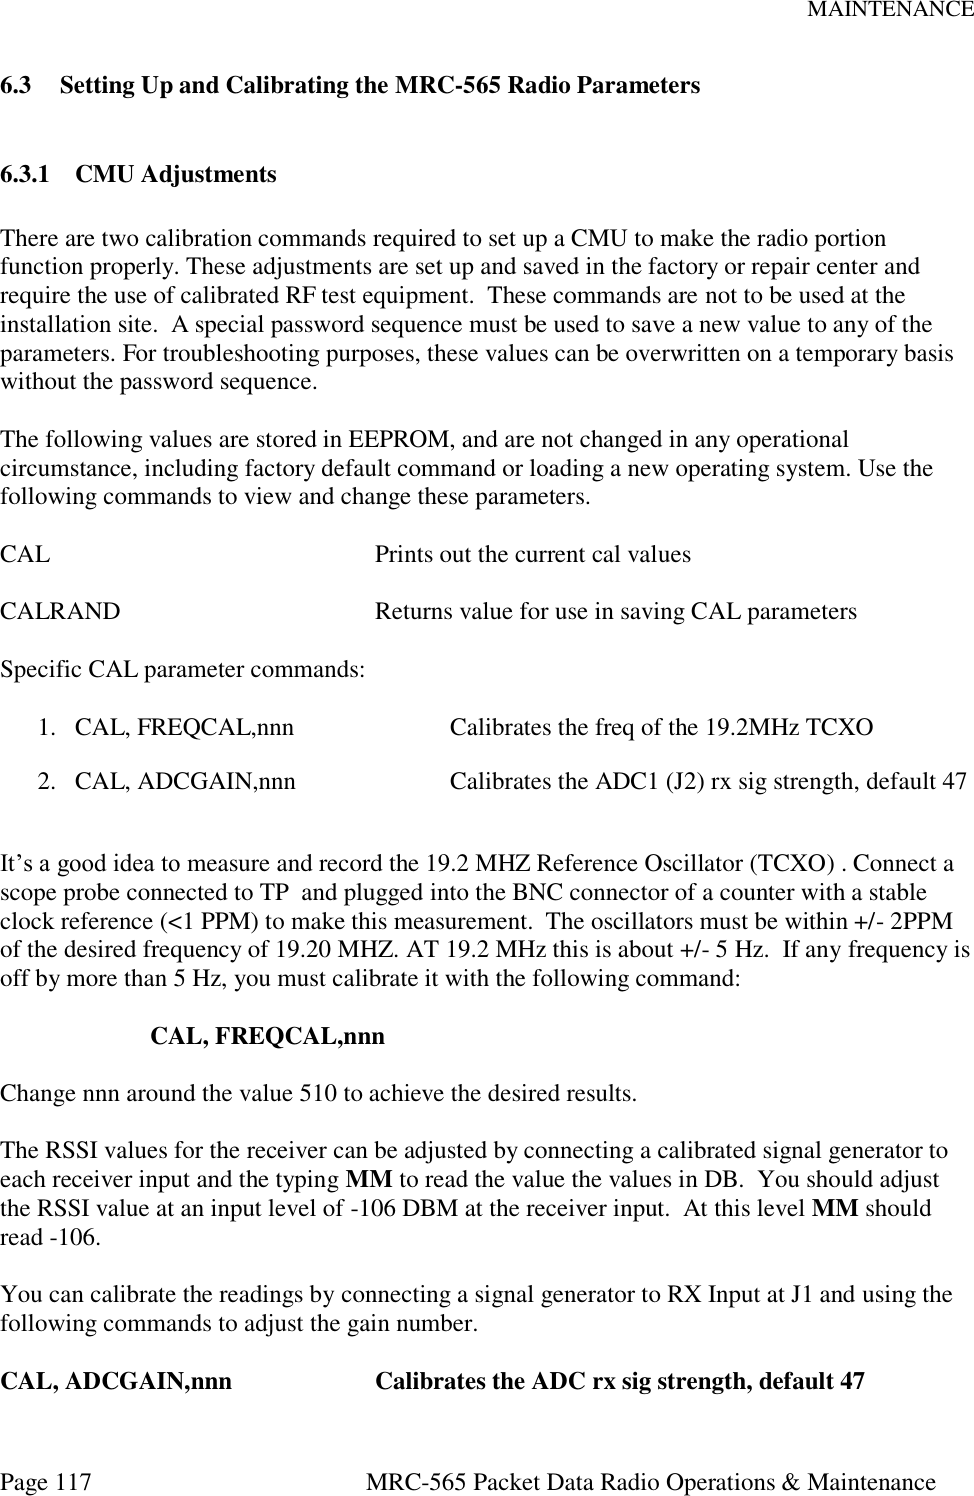 MAINTENANCE Page 117  MRC-565 Packet Data Radio Operations &amp; Maintenance 6.3 Setting Up and Calibrating the MRC-565 Radio Parameters  6.3.1 CMU Adjustments  There are two calibration commands required to set up a CMU to make the radio portion function properly. These adjustments are set up and saved in the factory or repair center and require the use of calibrated RF test equipment.  These commands are not to be used at the installation site.  A special password sequence must be used to save a new value to any of the parameters. For troubleshooting purposes, these values can be overwritten on a temporary basis without the password sequence.  The following values are stored in EEPROM, and are not changed in any operational circumstance, including factory default command or loading a new operating system. Use the following commands to view and change these parameters.  CAL          Prints out the current cal values  CALRAND        Returns value for use in saving CAL parameters  Specific CAL parameter commands:  1. CAL, FREQCAL,nnn     Calibrates the freq of the 19.2MHz TCXO 2. CAL, ADCGAIN,nnn     Calibrates the ADC1 (J2) rx sig strength, default 47  It’s a good idea to measure and record the 19.2 MHZ Reference Oscillator (TCXO) . Connect a scope probe connected to TP  and plugged into the BNC connector of a counter with a stable clock reference (&lt;1 PPM) to make this measurement.  The oscillators must be within +/- 2PPM of the desired frequency of 19.20 MHZ. AT 19.2 MHz this is about +/- 5 Hz.  If any frequency is off by more than 5 Hz, you must calibrate it with the following command:  CAL, FREQCAL,nnn  Change nnn around the value 510 to achieve the desired results.  The RSSI values for the receiver can be adjusted by connecting a calibrated signal generator to each receiver input and the typing MM to read the value the values in DB.  You should adjust the RSSI value at an input level of -106 DBM at the receiver input.  At this level MM should read -106.  You can calibrate the readings by connecting a signal generator to RX Input at J1 and using the following commands to adjust the gain number.  CAL, ADCGAIN,nnn    Calibrates the ADC rx sig strength, default 47 